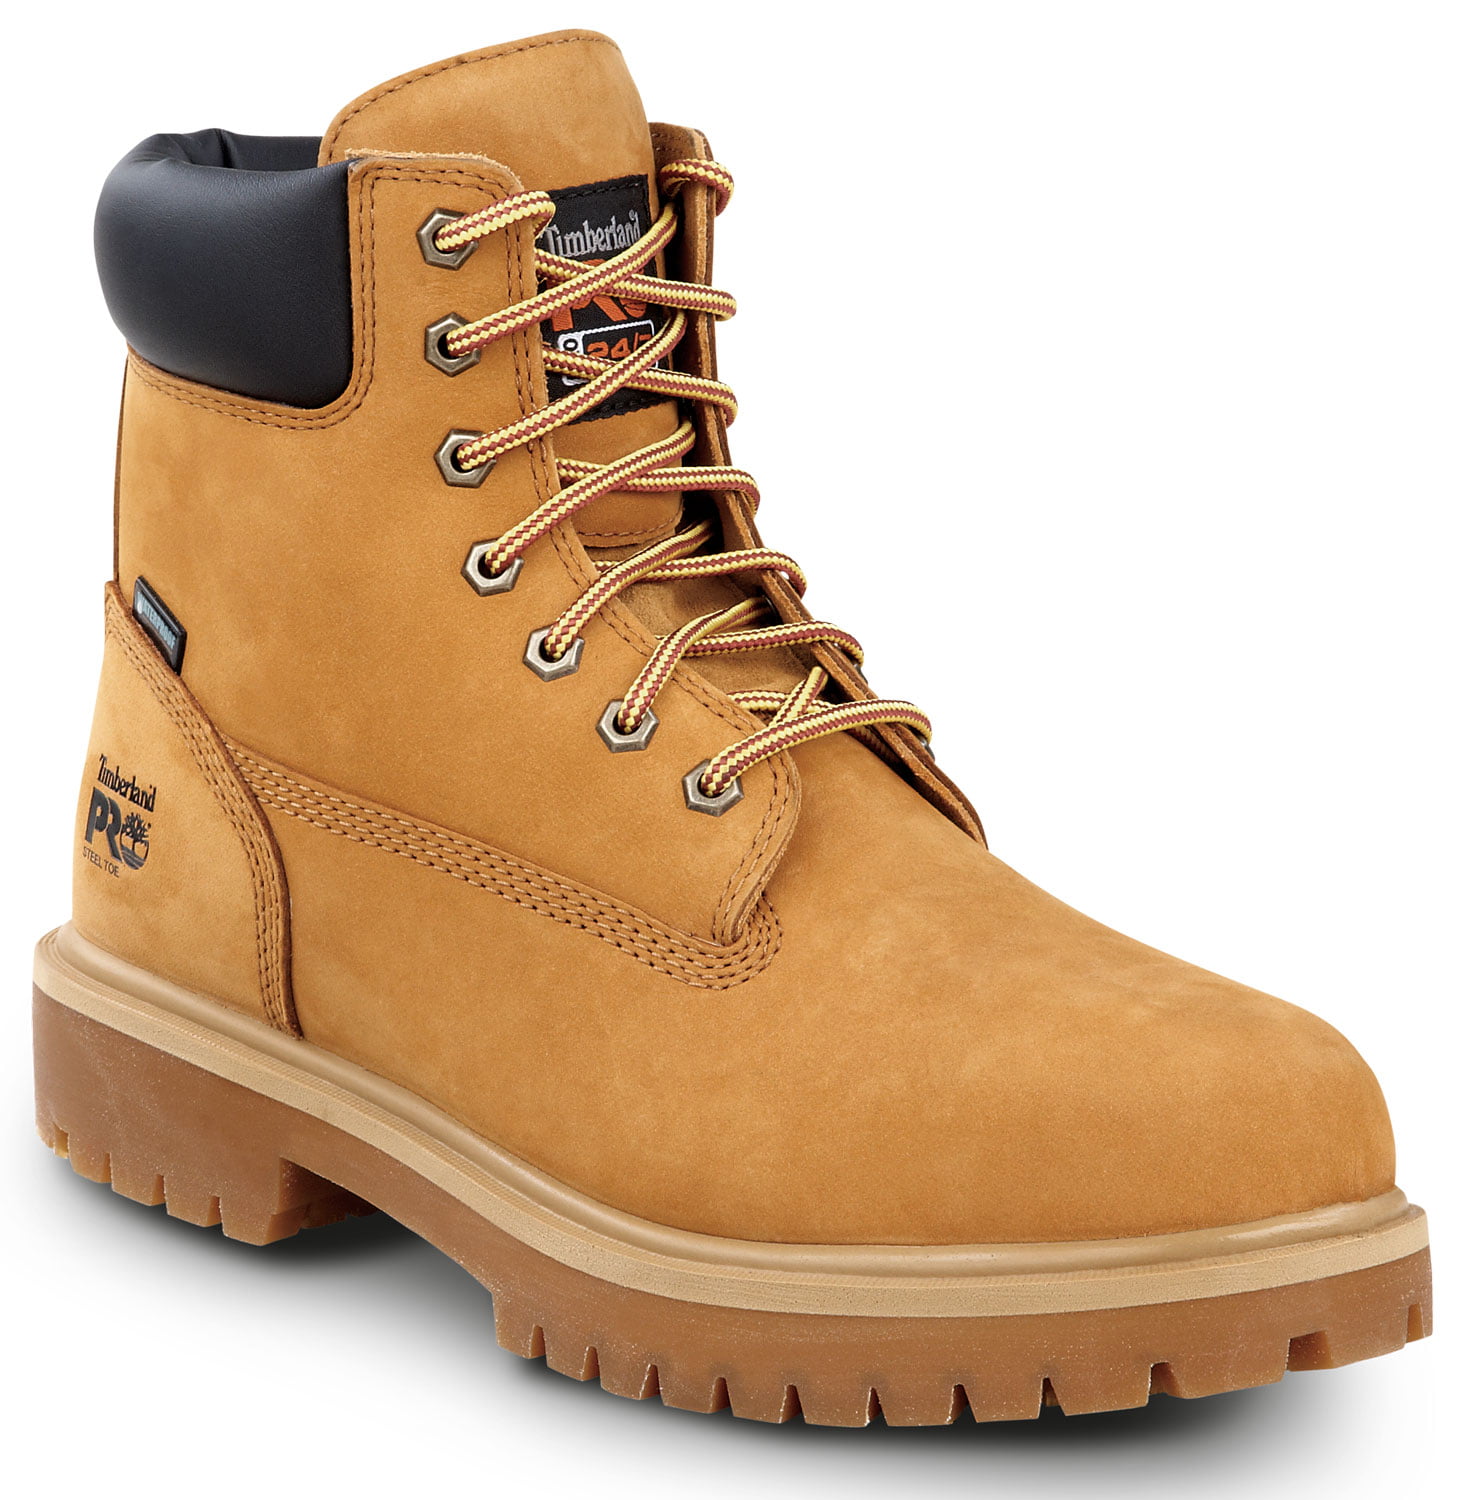 Timberland PRO 6IN Direct Attach Men's, Wheat, Steel Toe, EH, MaxTRAX Slip Resistant, WP Boot M) - Walmart.com